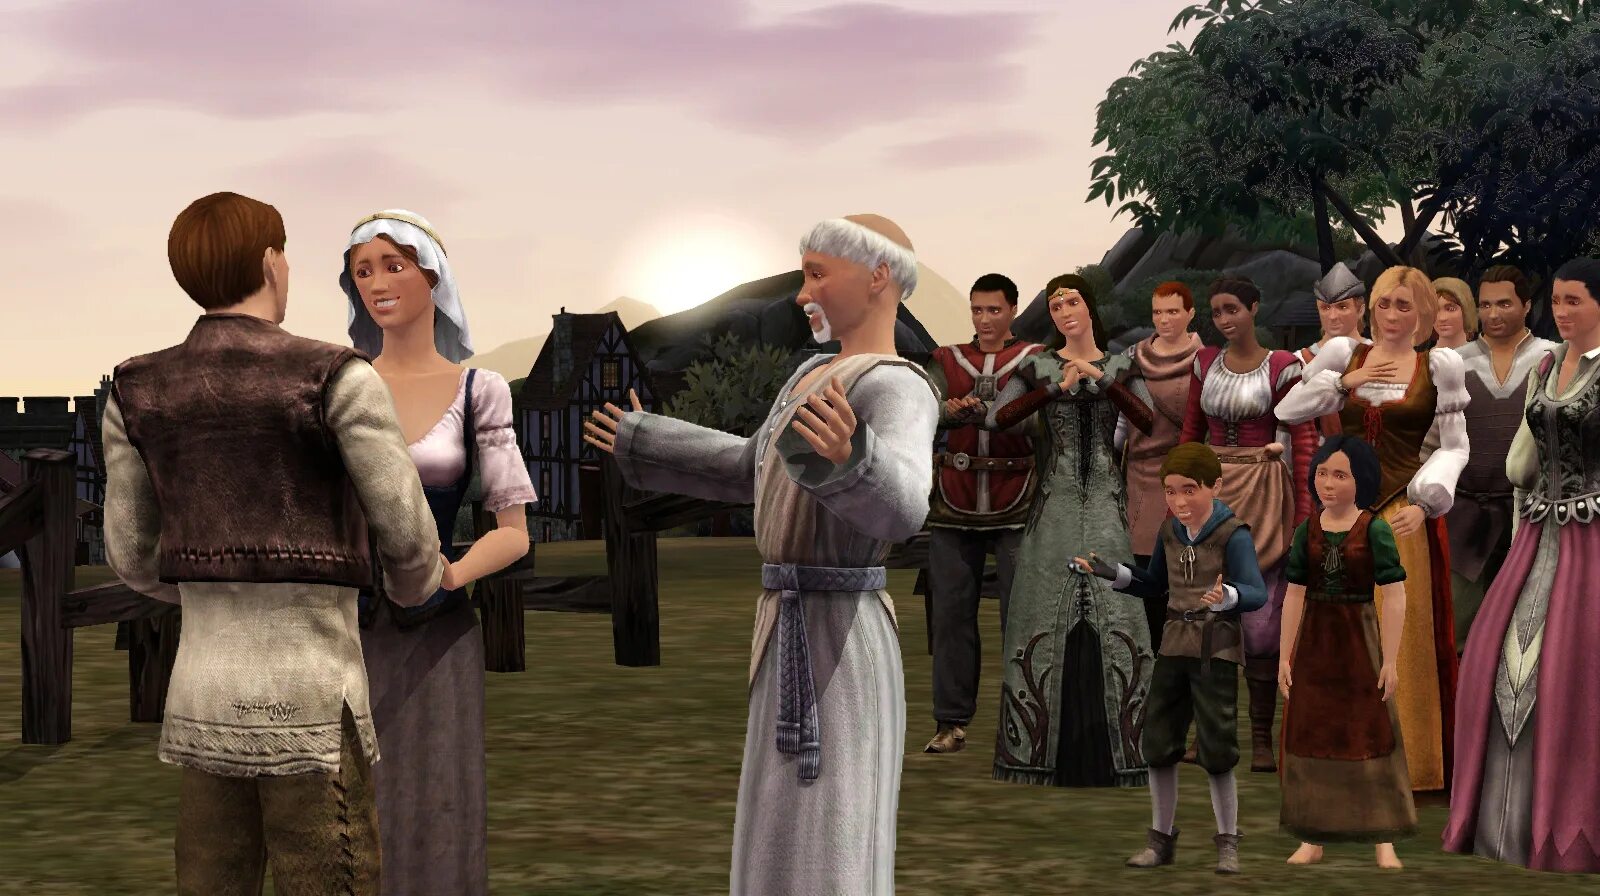 Middle ages 1. The SIMS Medieval. SIMS 3 Medieval. Симс 3 медивал Король. SIMS Medieval +18.